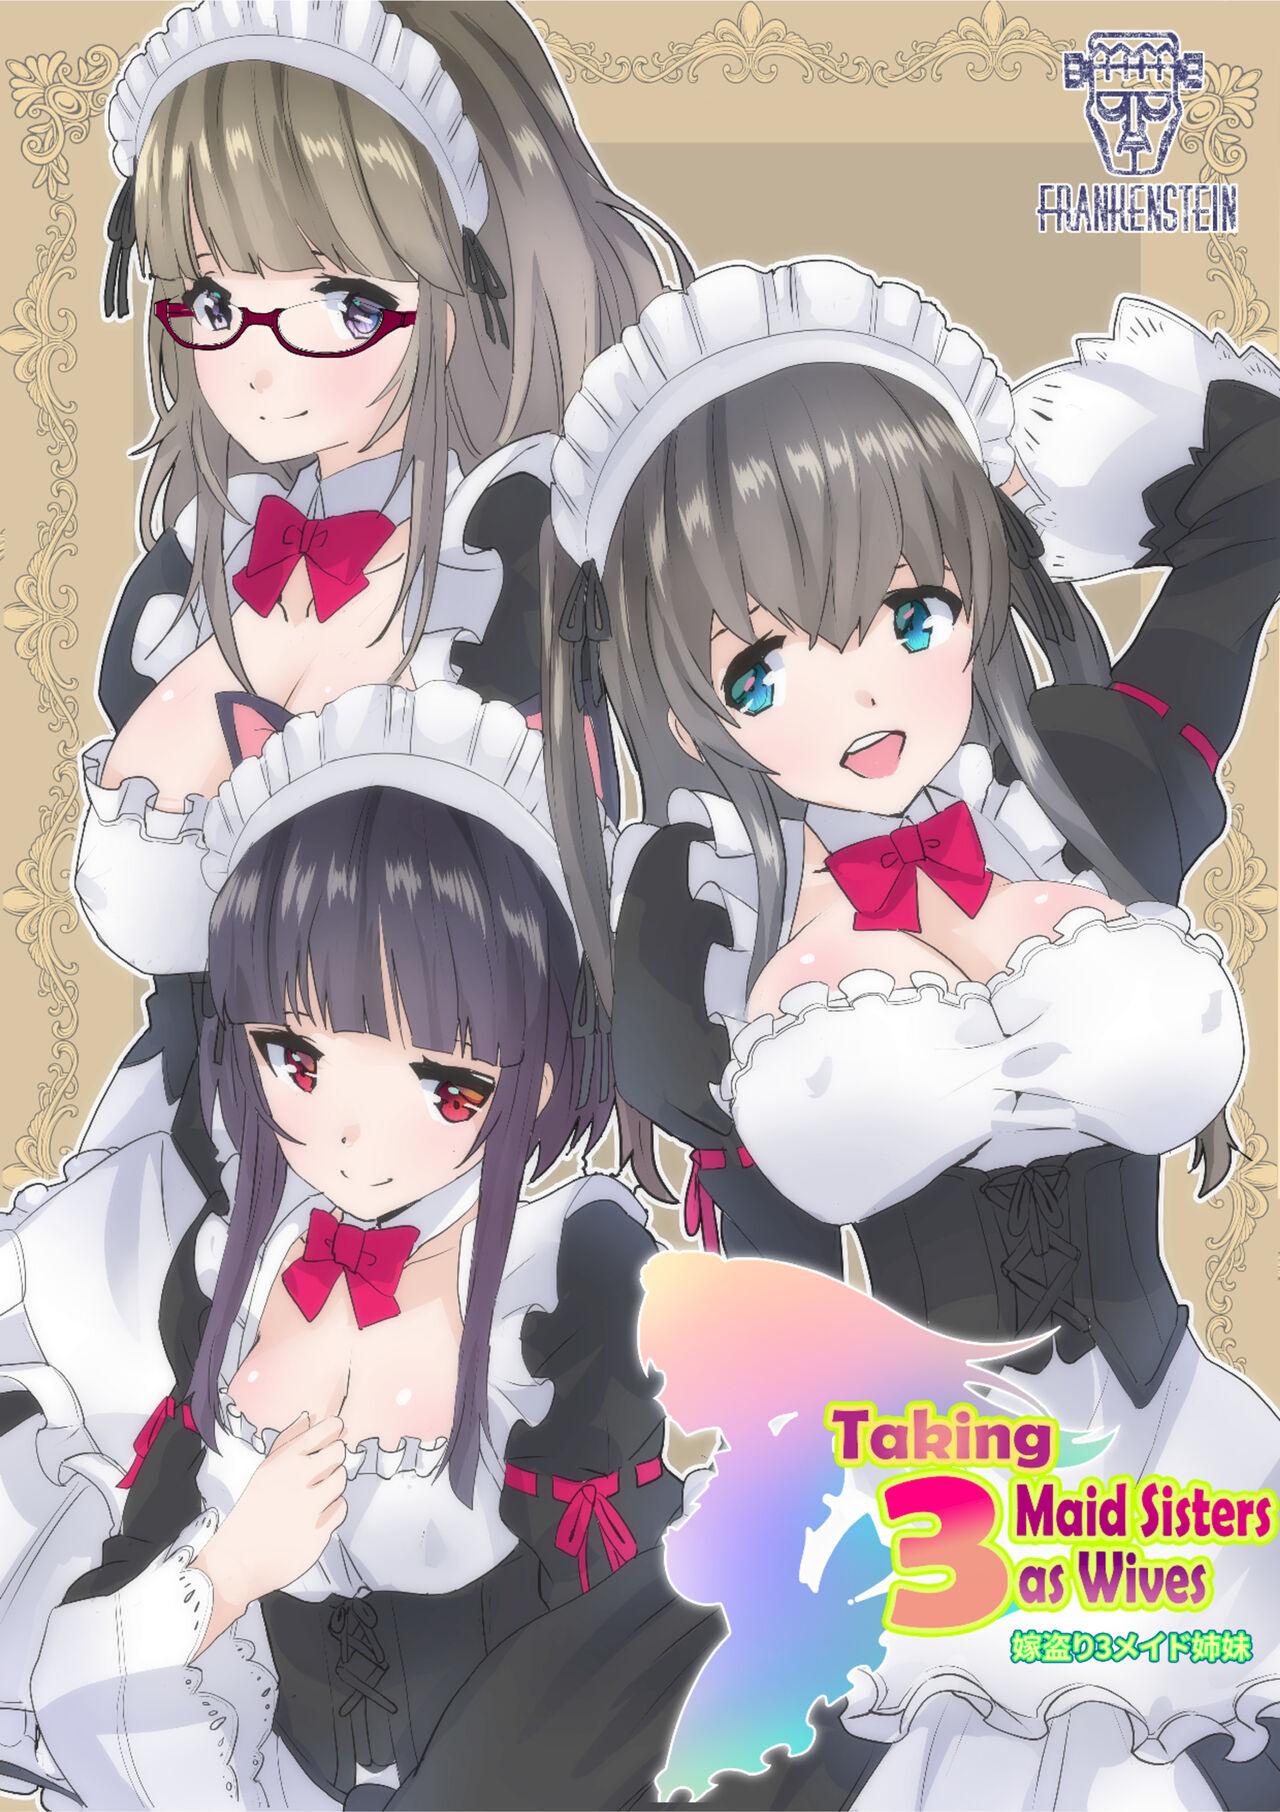 Taking 3 Maid Sisters As Wives 0